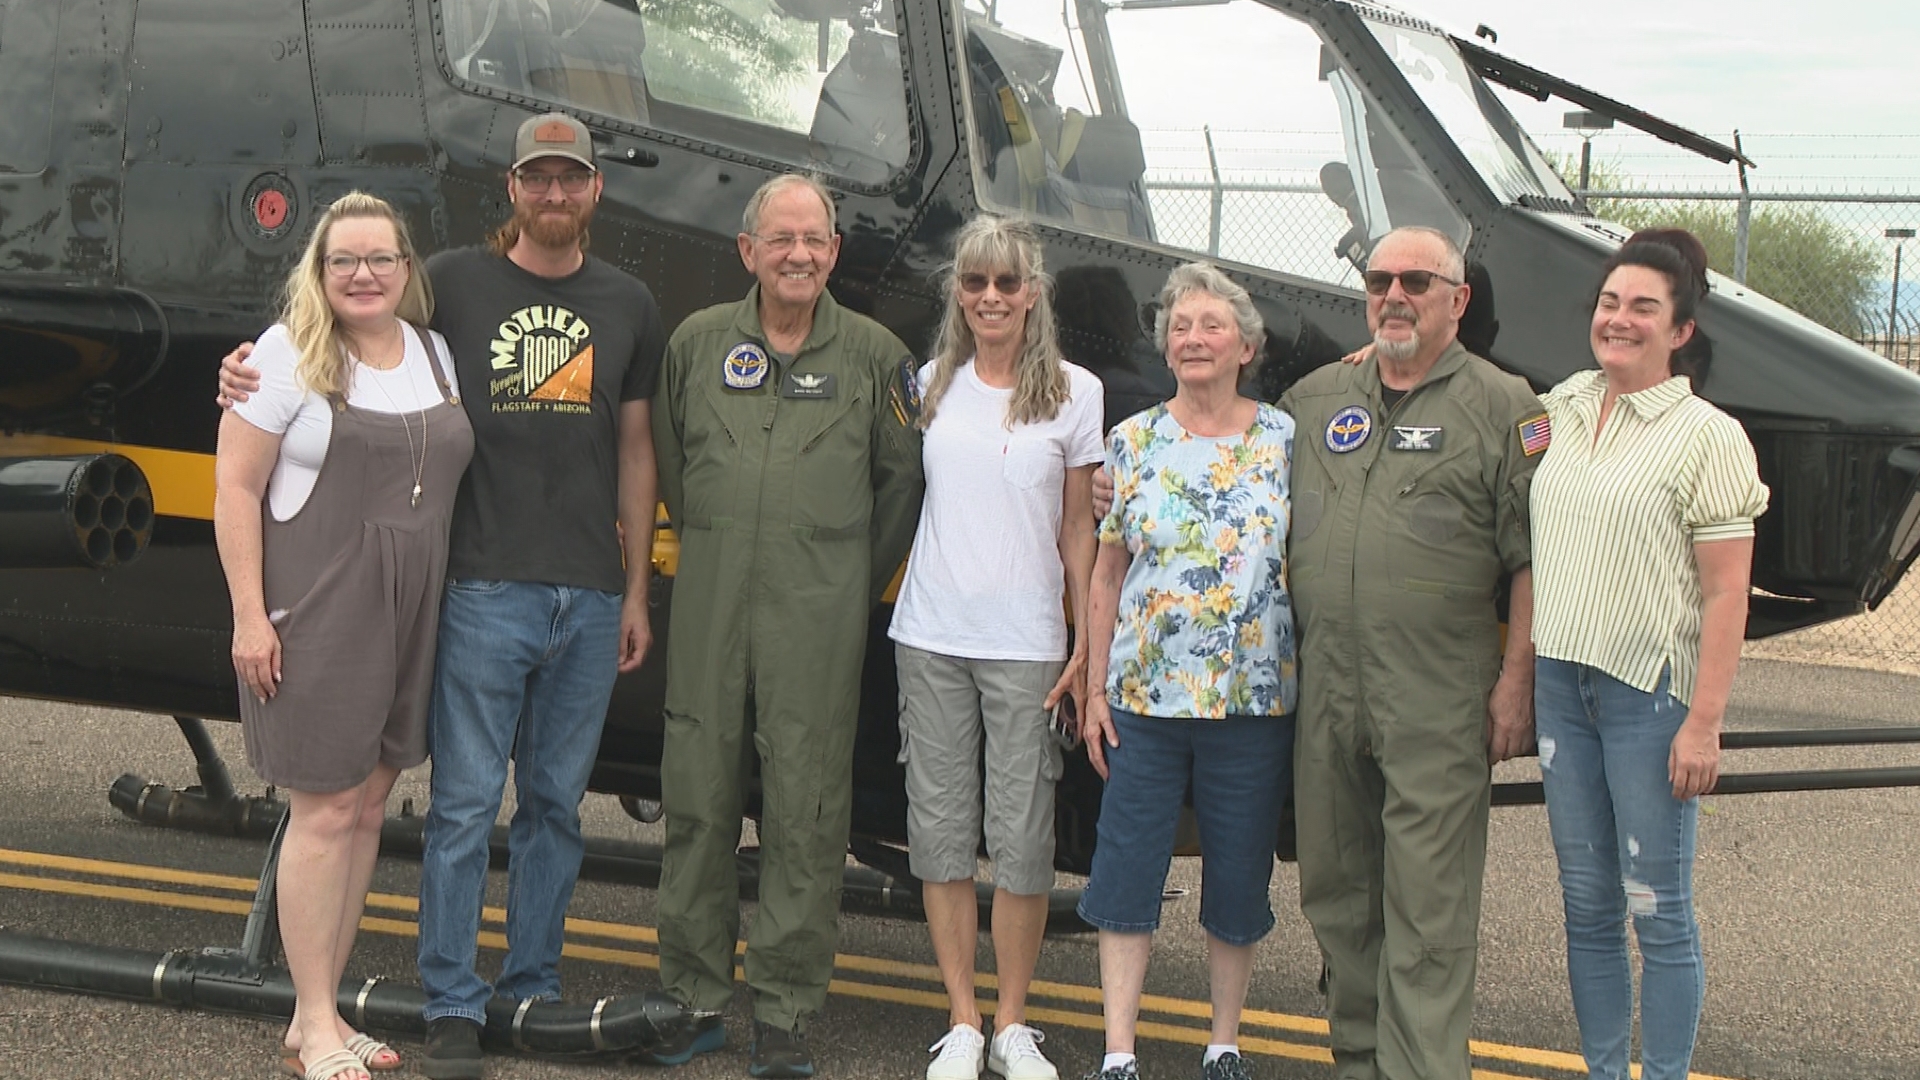 Mark Metzger has been flying civilian and military aircraft for more than 50 years. He is now retiring but before his is grounded for good, he had one last flight.